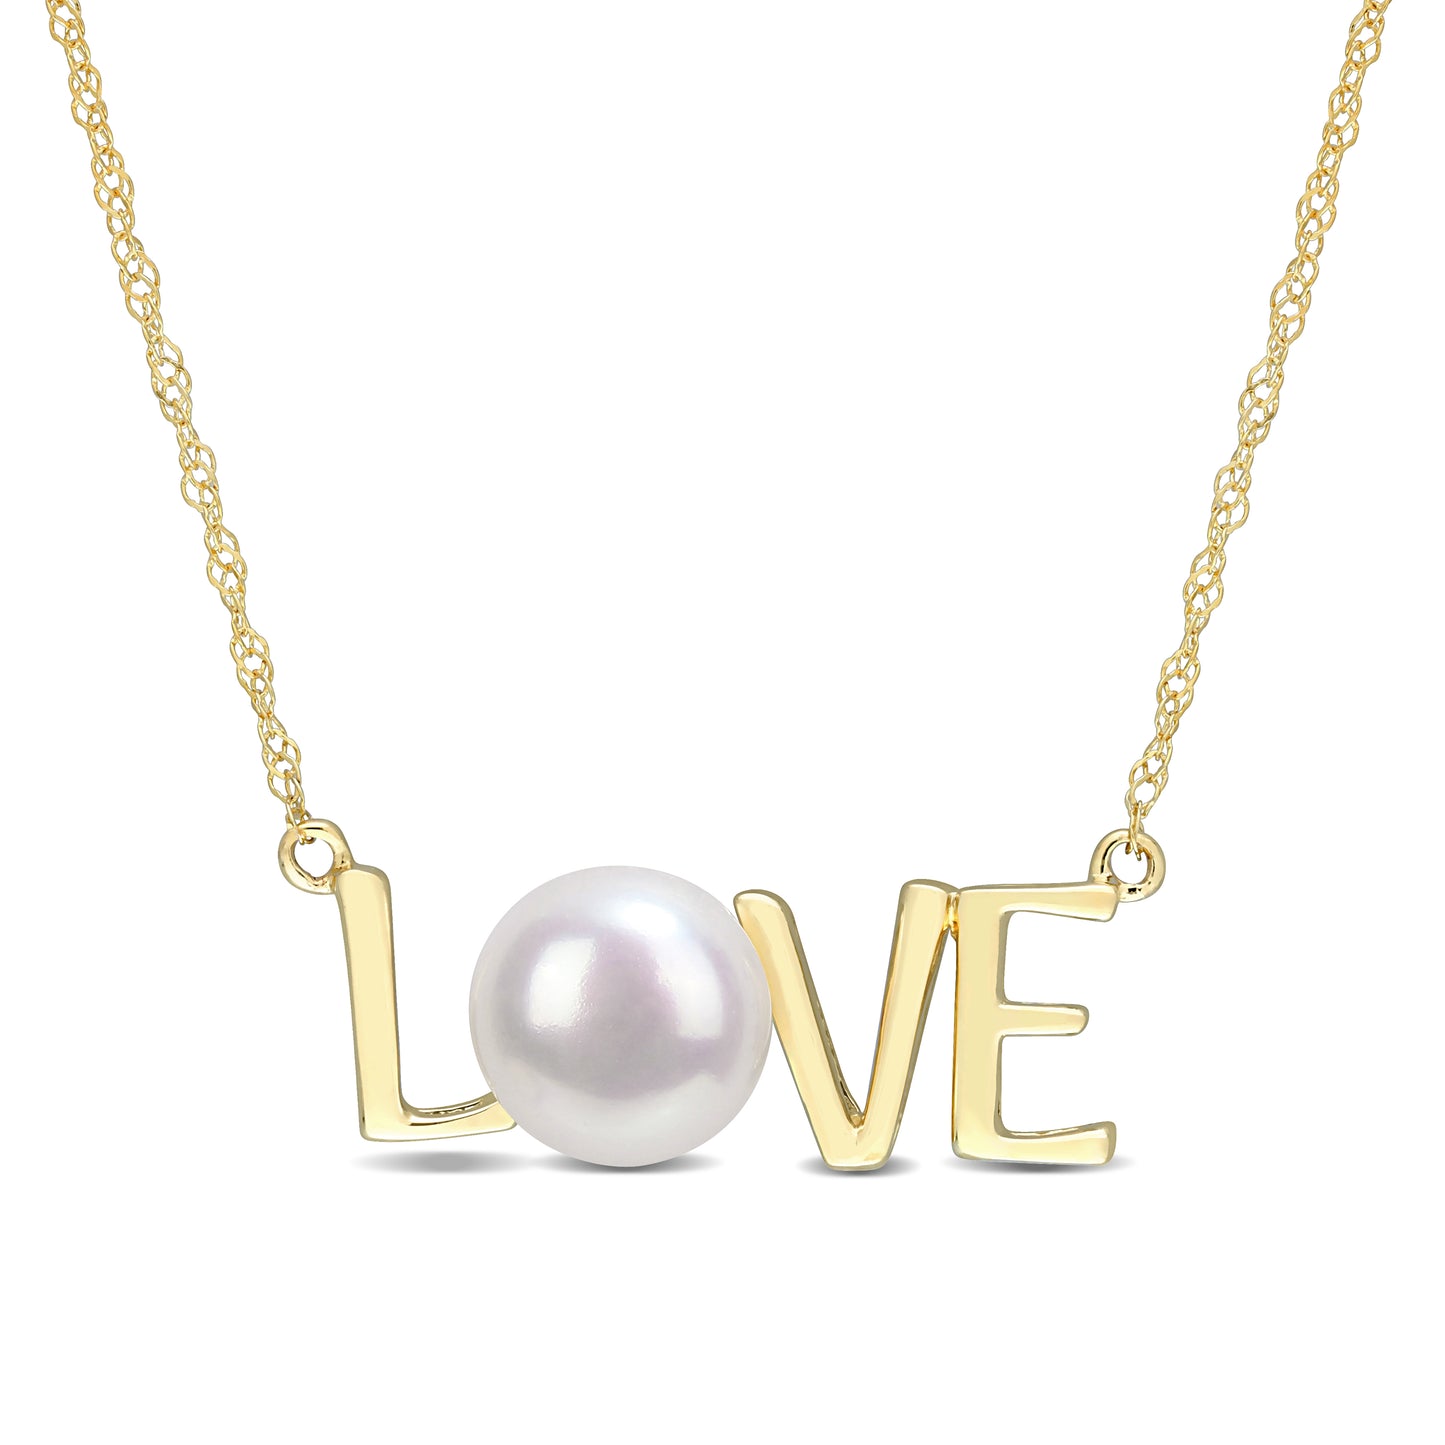 Pearl "LOVE" Necklace in 10k Yellow Gold